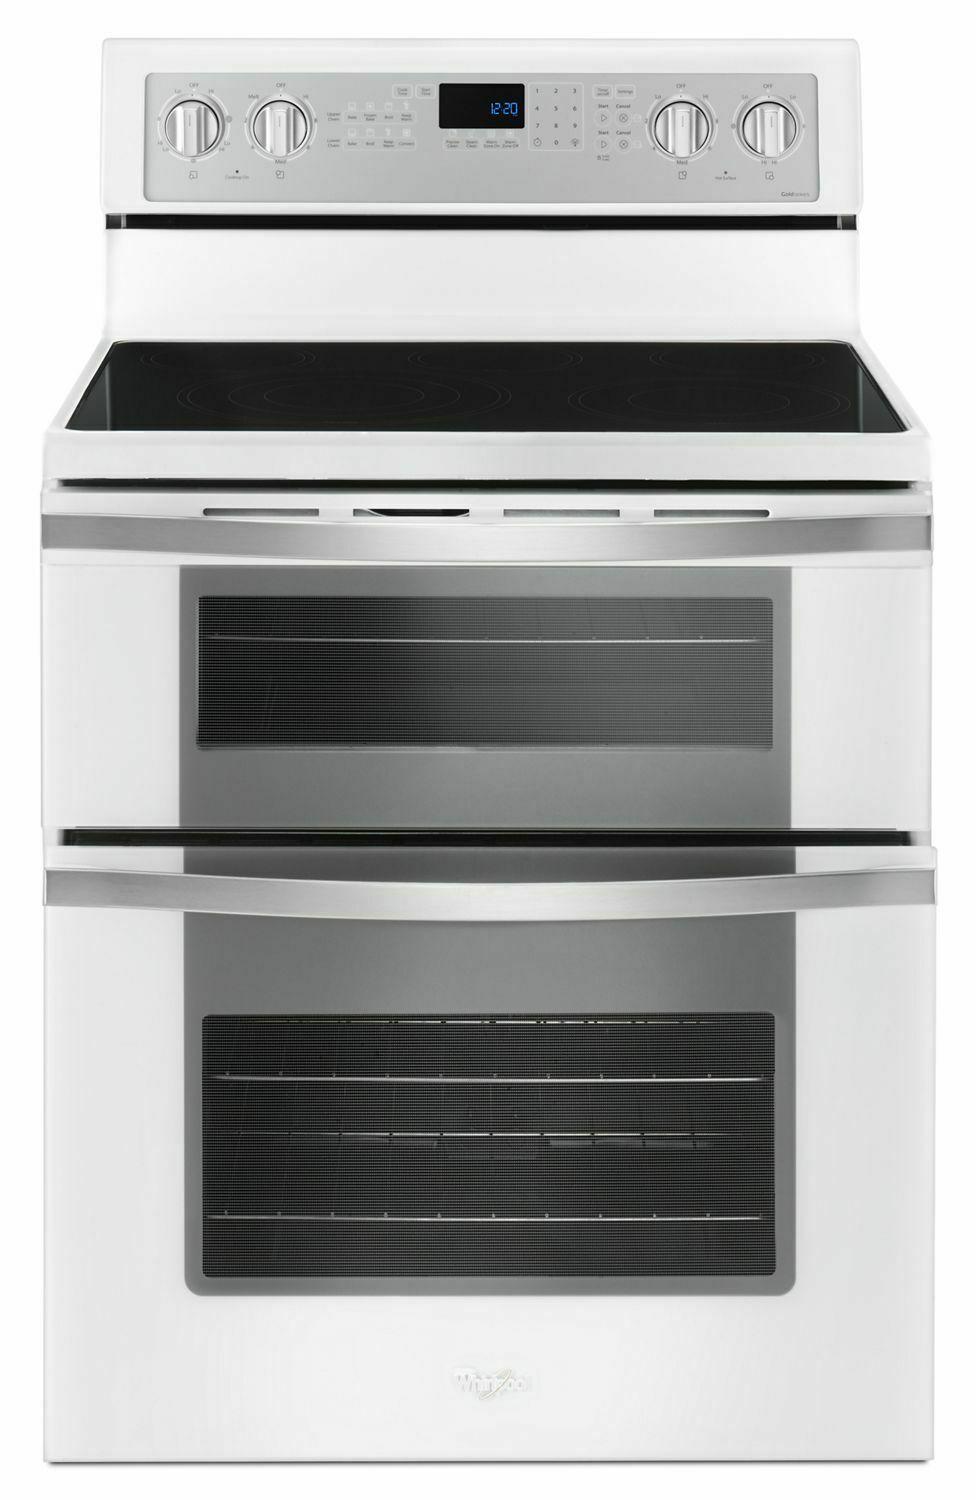 Whirlpool 6.7 Cu. Ft. Electric Double Oven Range with True Convection